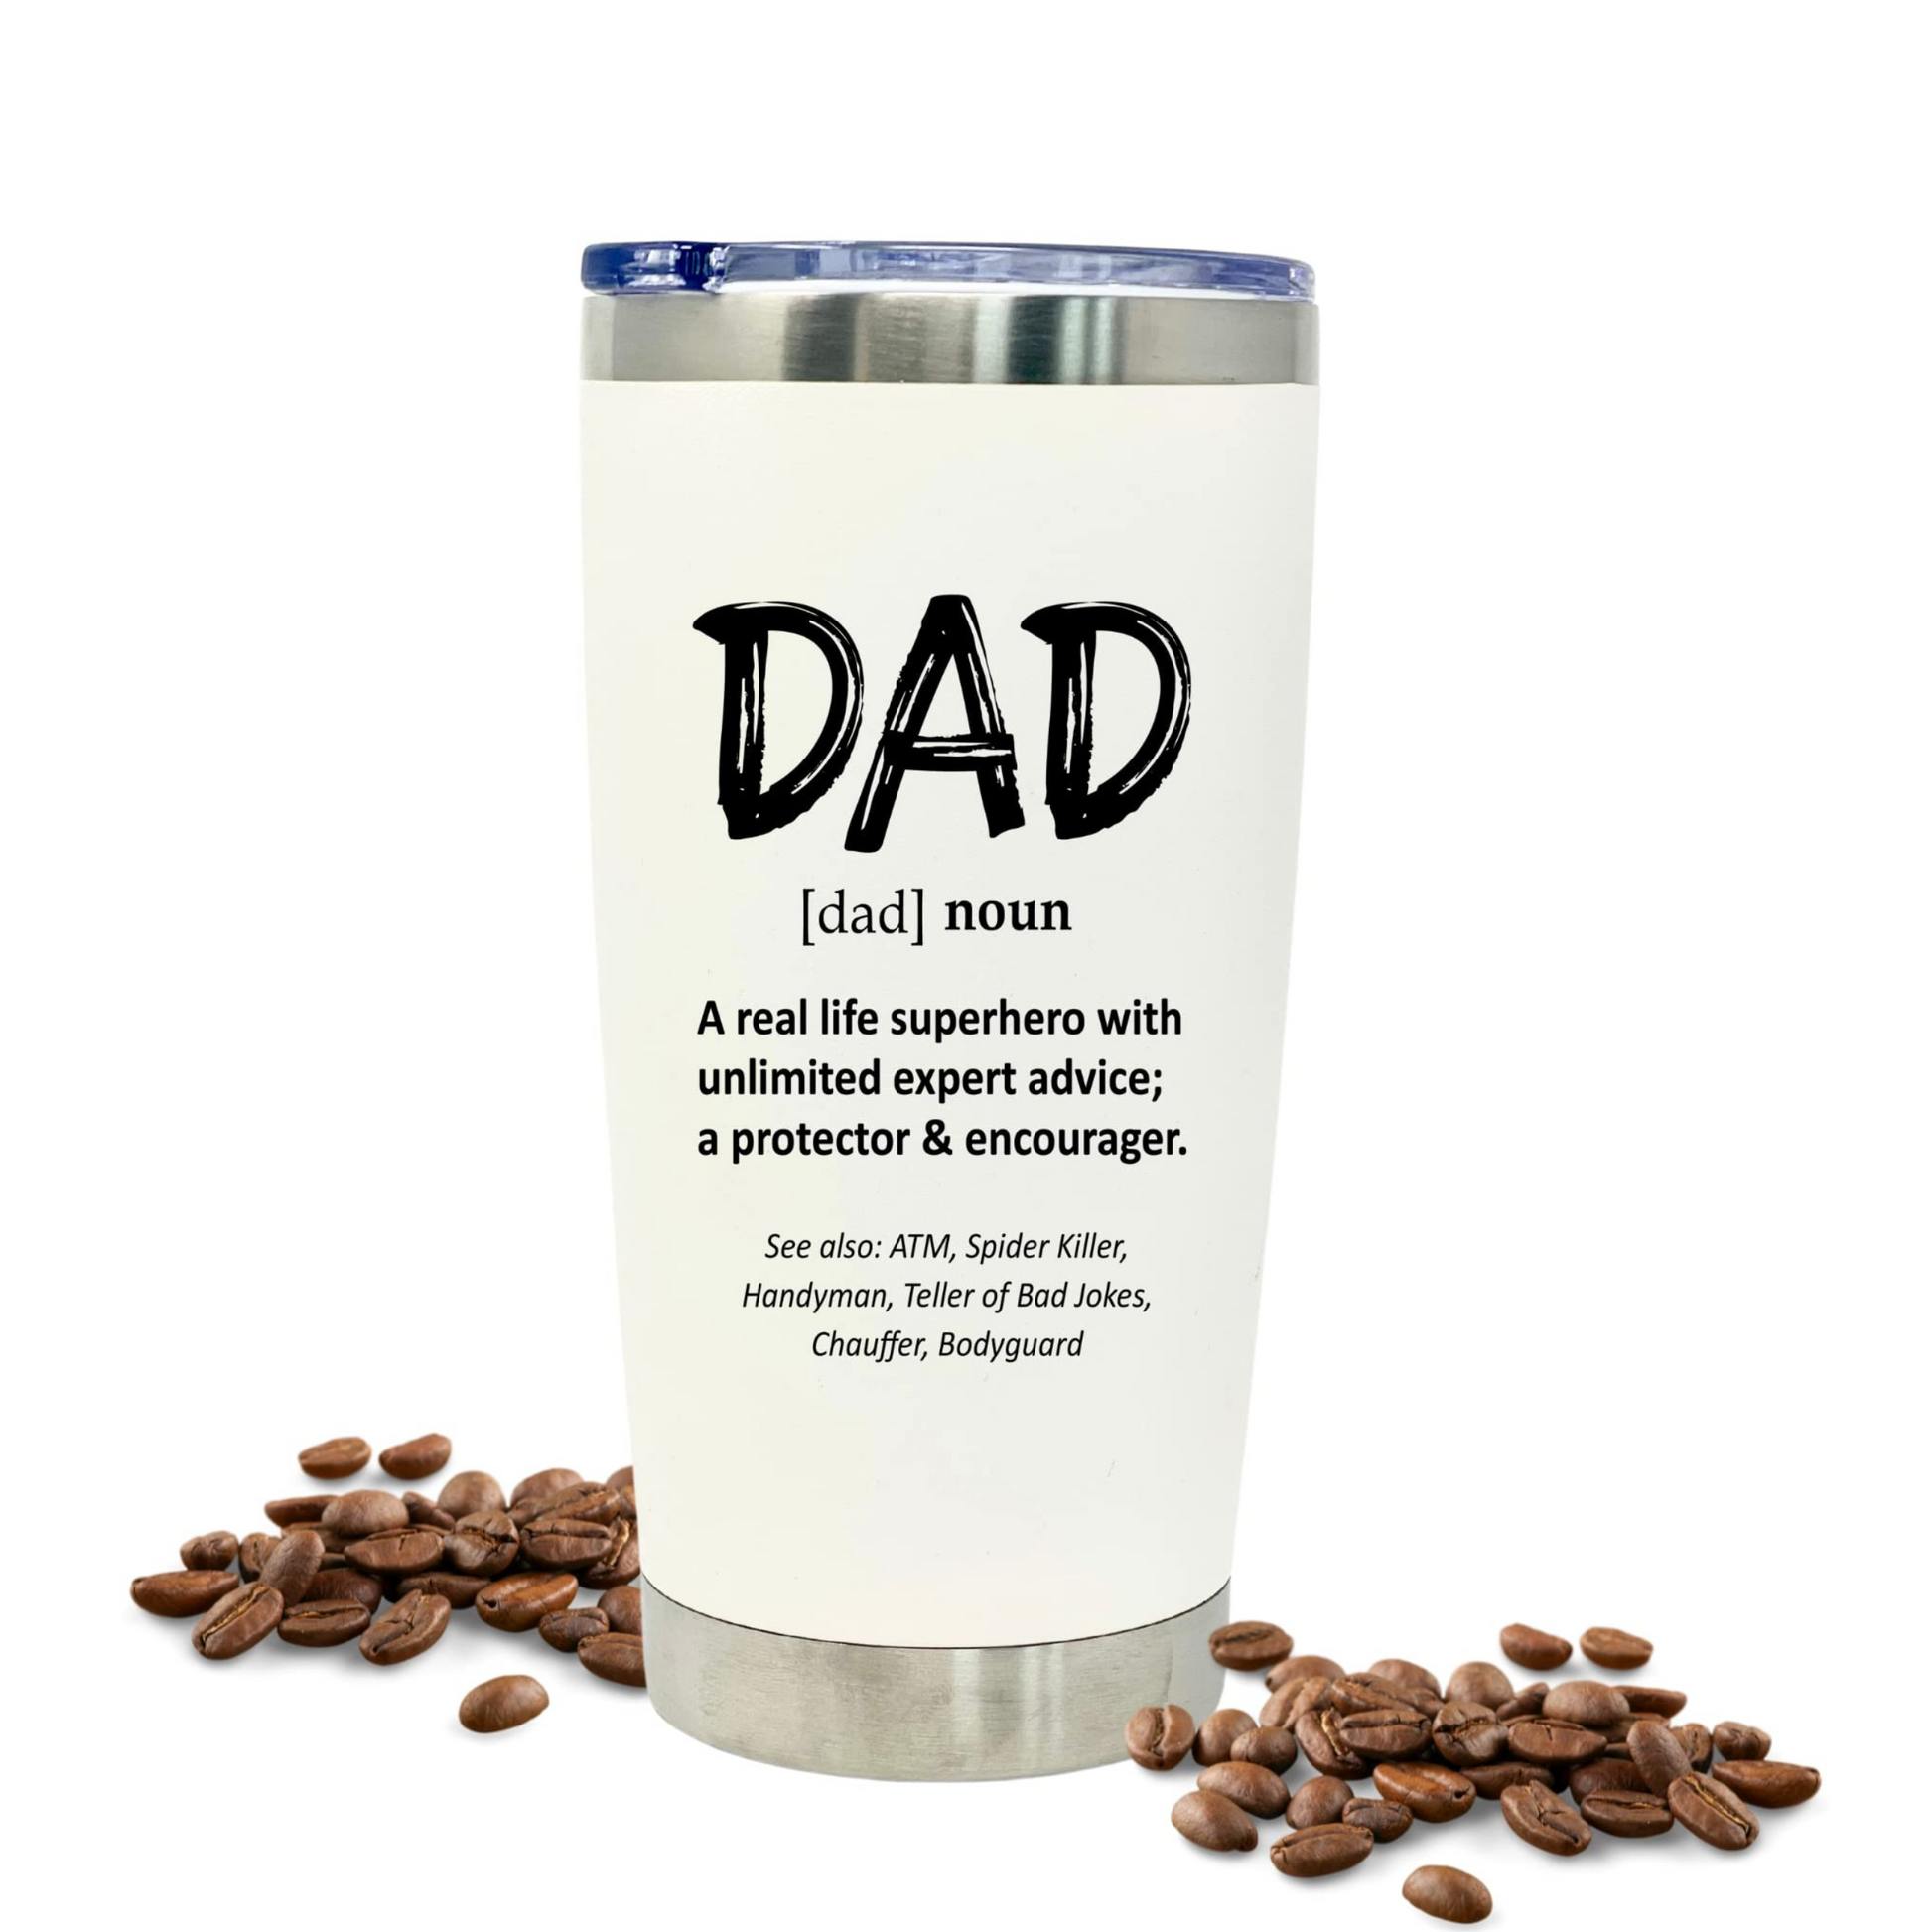 LOL Definition Tumbler, Funny Dictionary Definitions, Novelty Explanation  Gift, Tumbler with Meanings, Funny Definition, Funny Gift For Men And  Women, White Tumbler : : Home